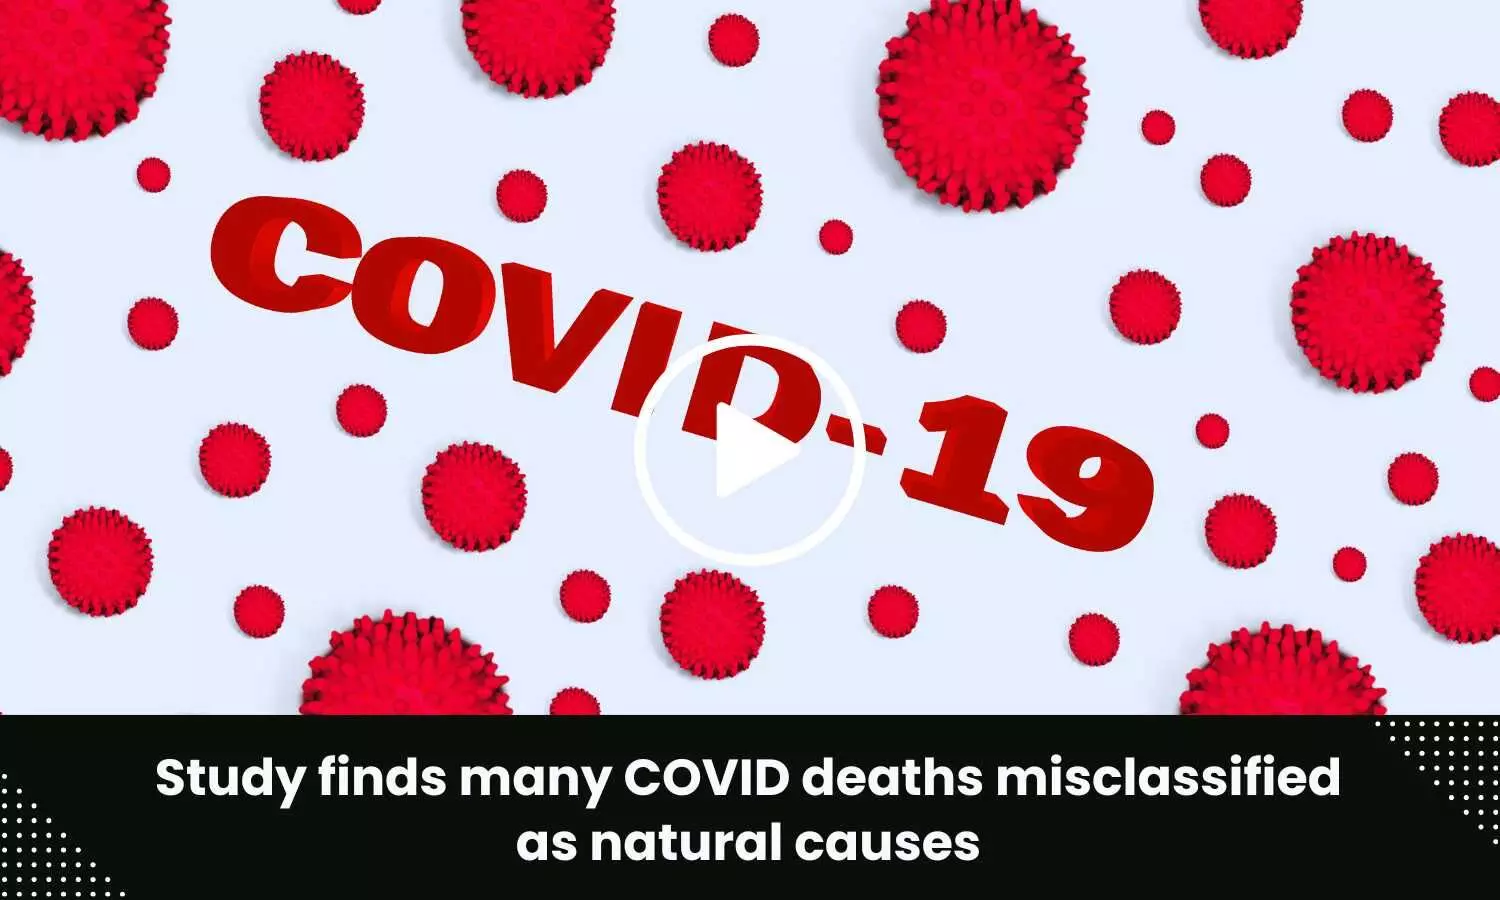 Study finds many COVID deaths misclassified as natural causes